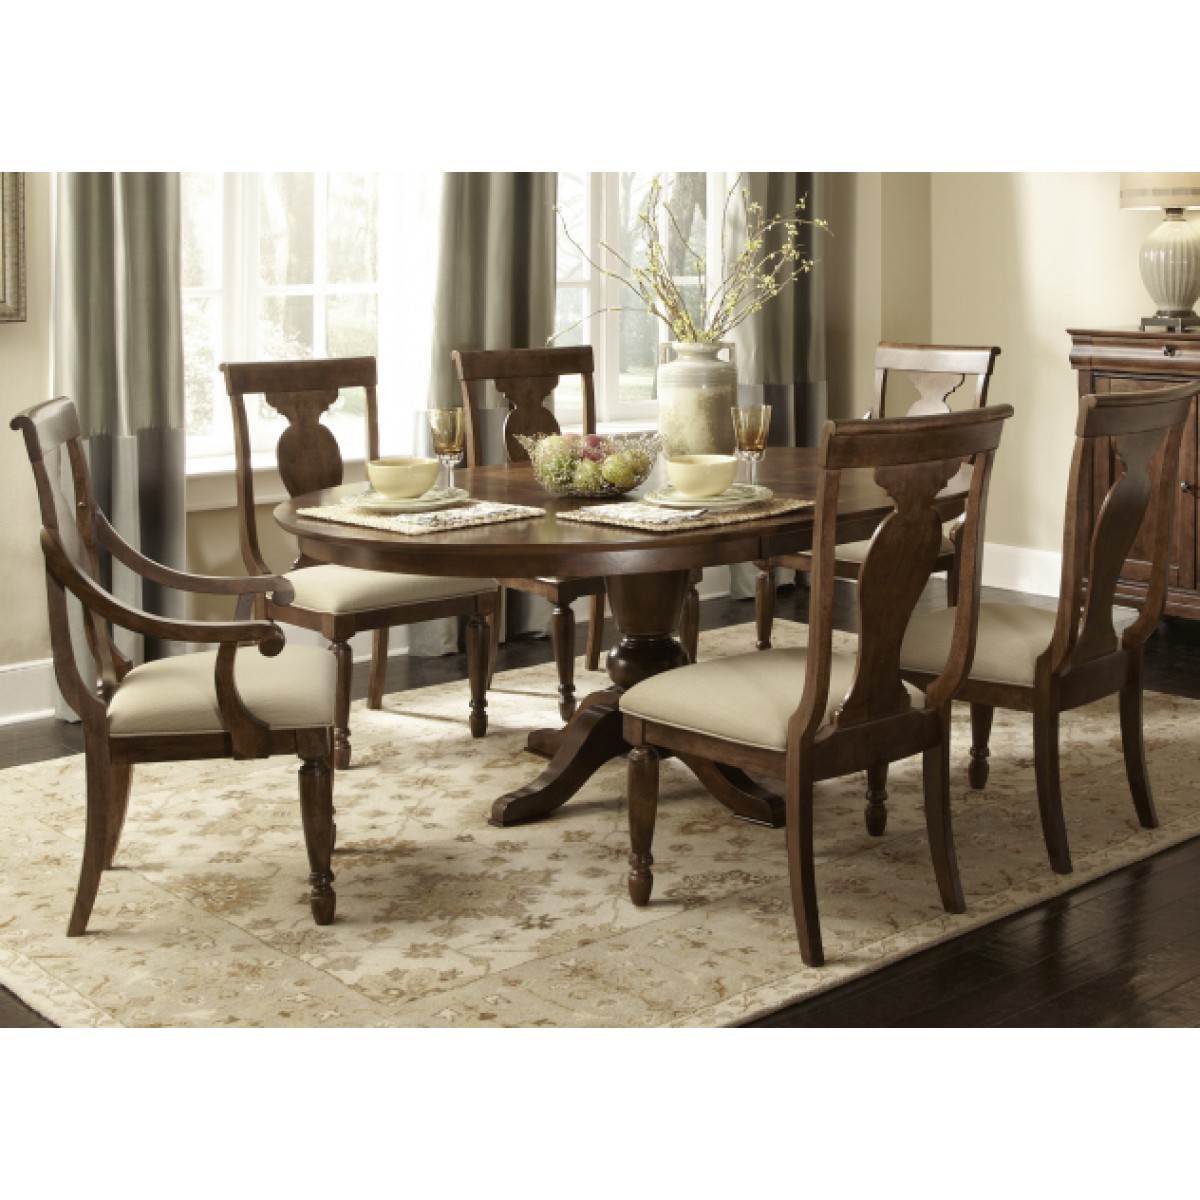 dining tables sets photo - 10